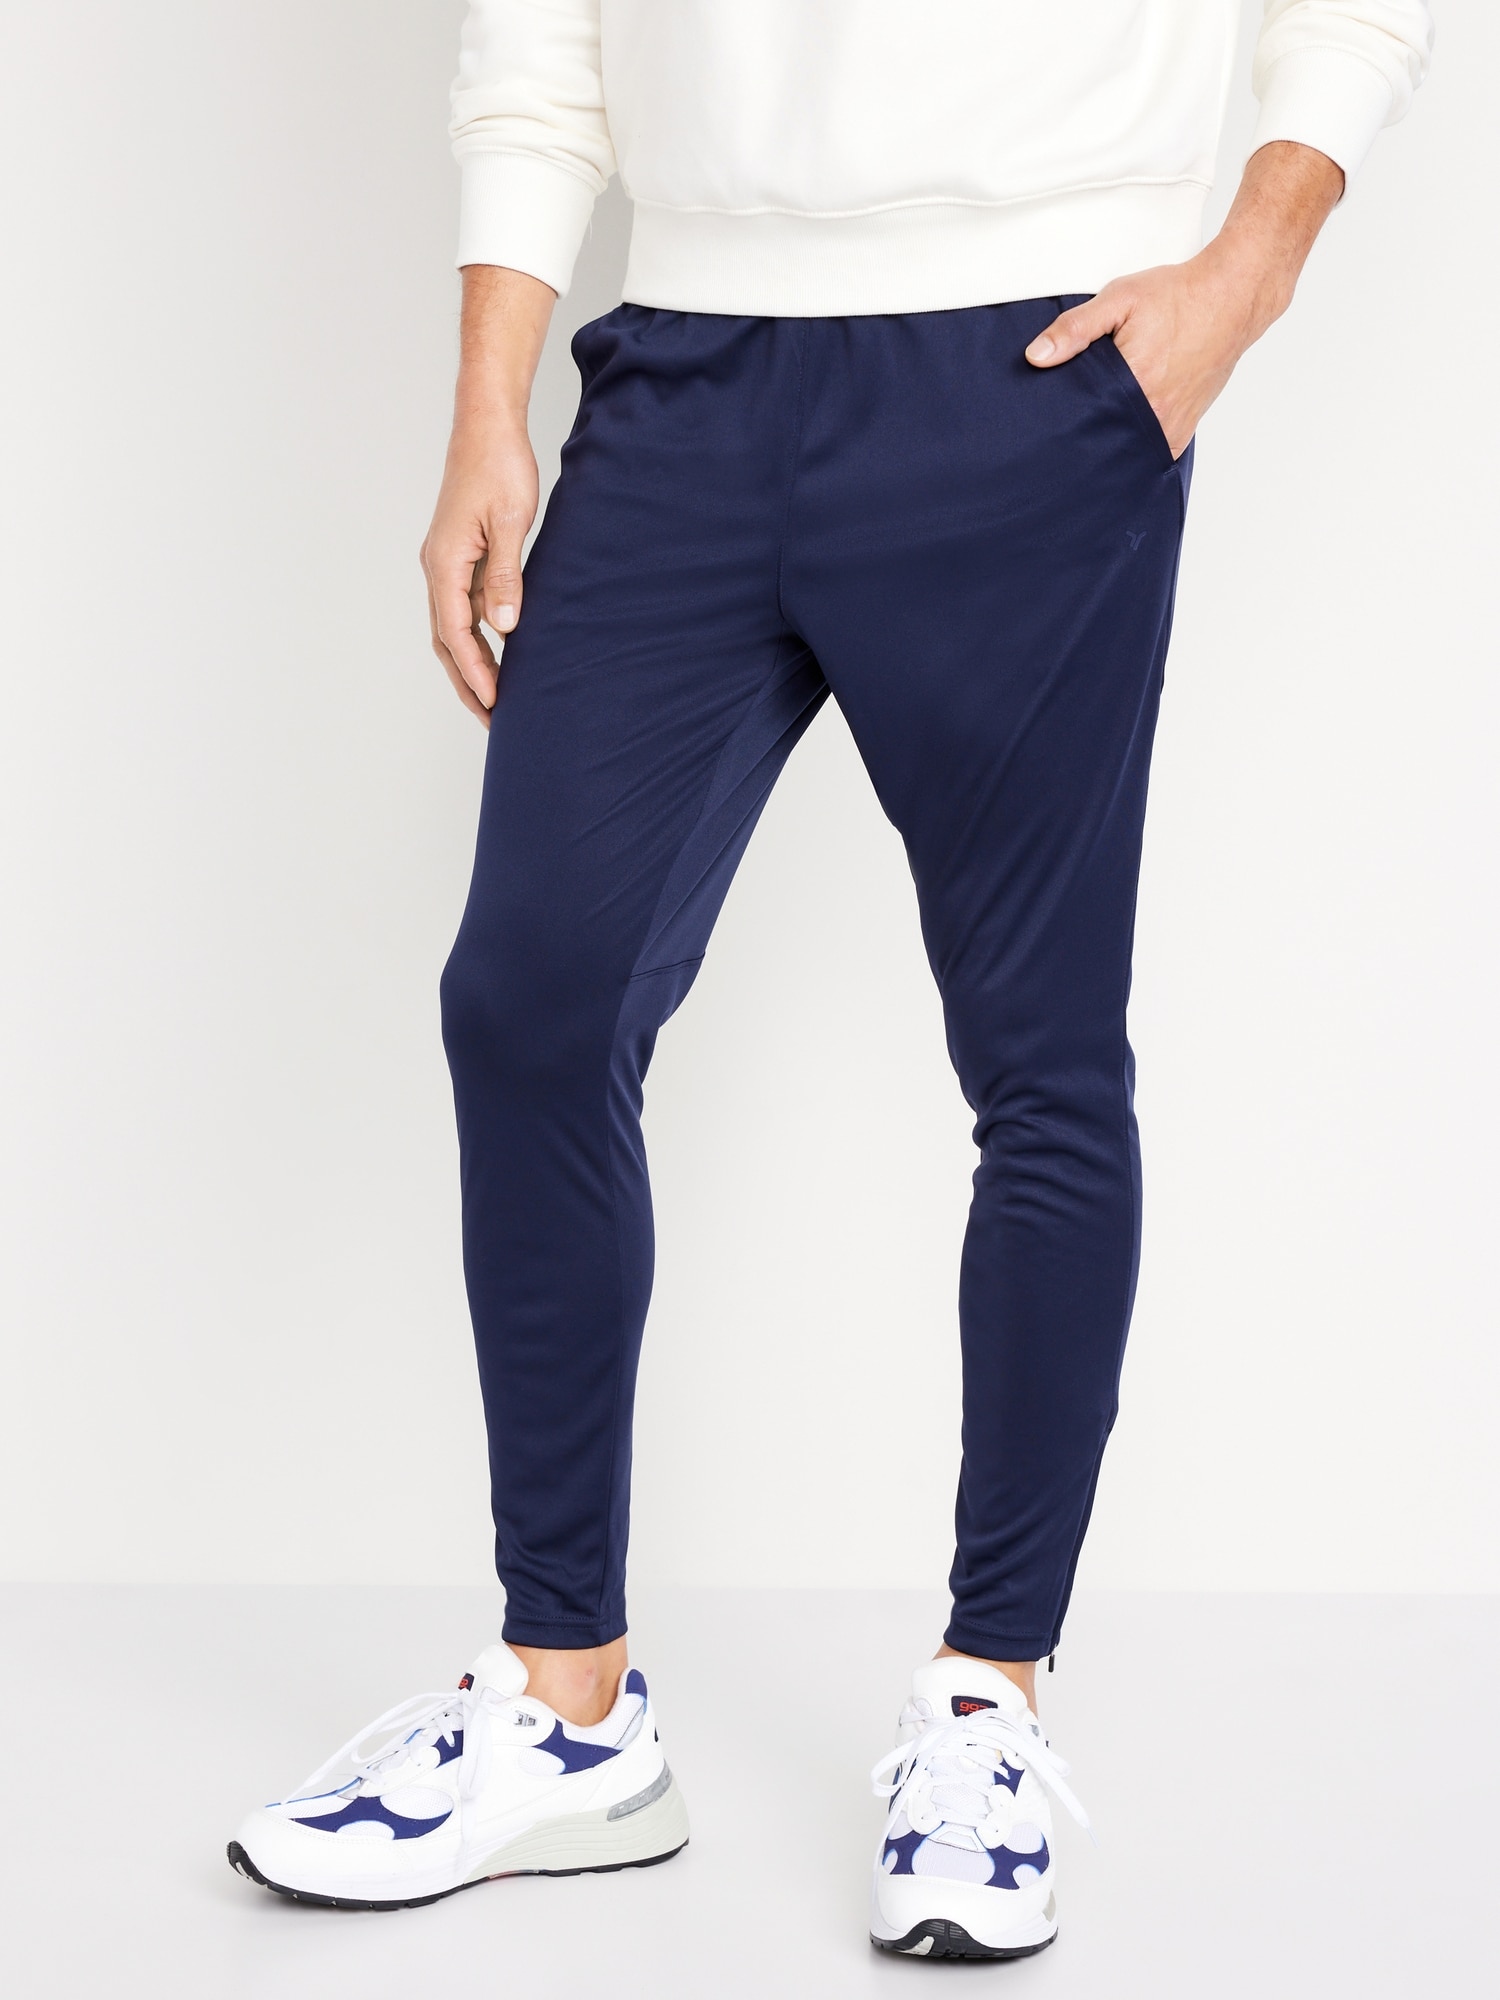 FEDTOSING Men's Sweatpants Cotton Male Jogger Loose Fit Navy Blue,up to  Size 3XL 